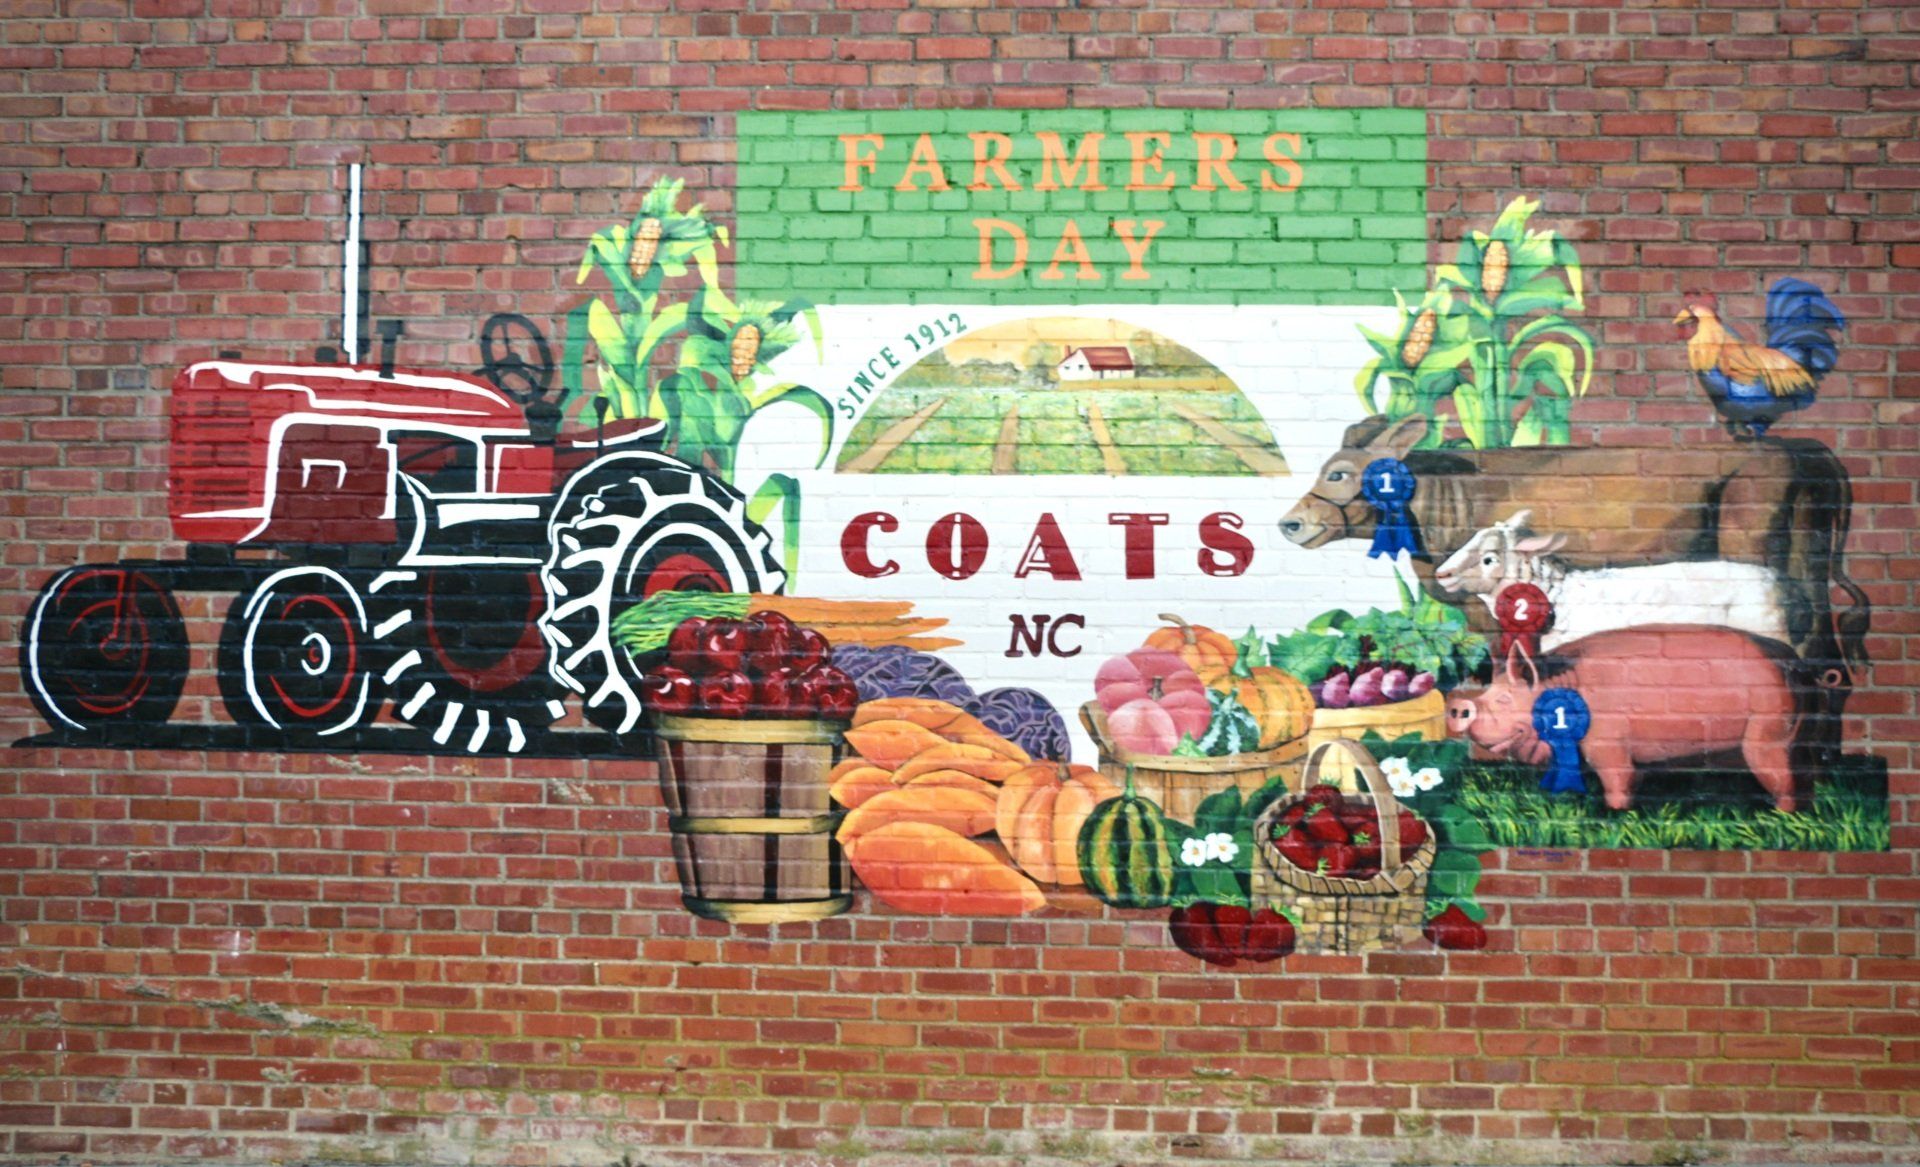 Photos of a farm mural in Coats, North Carolina featuring a tractor, produce, and farm animals